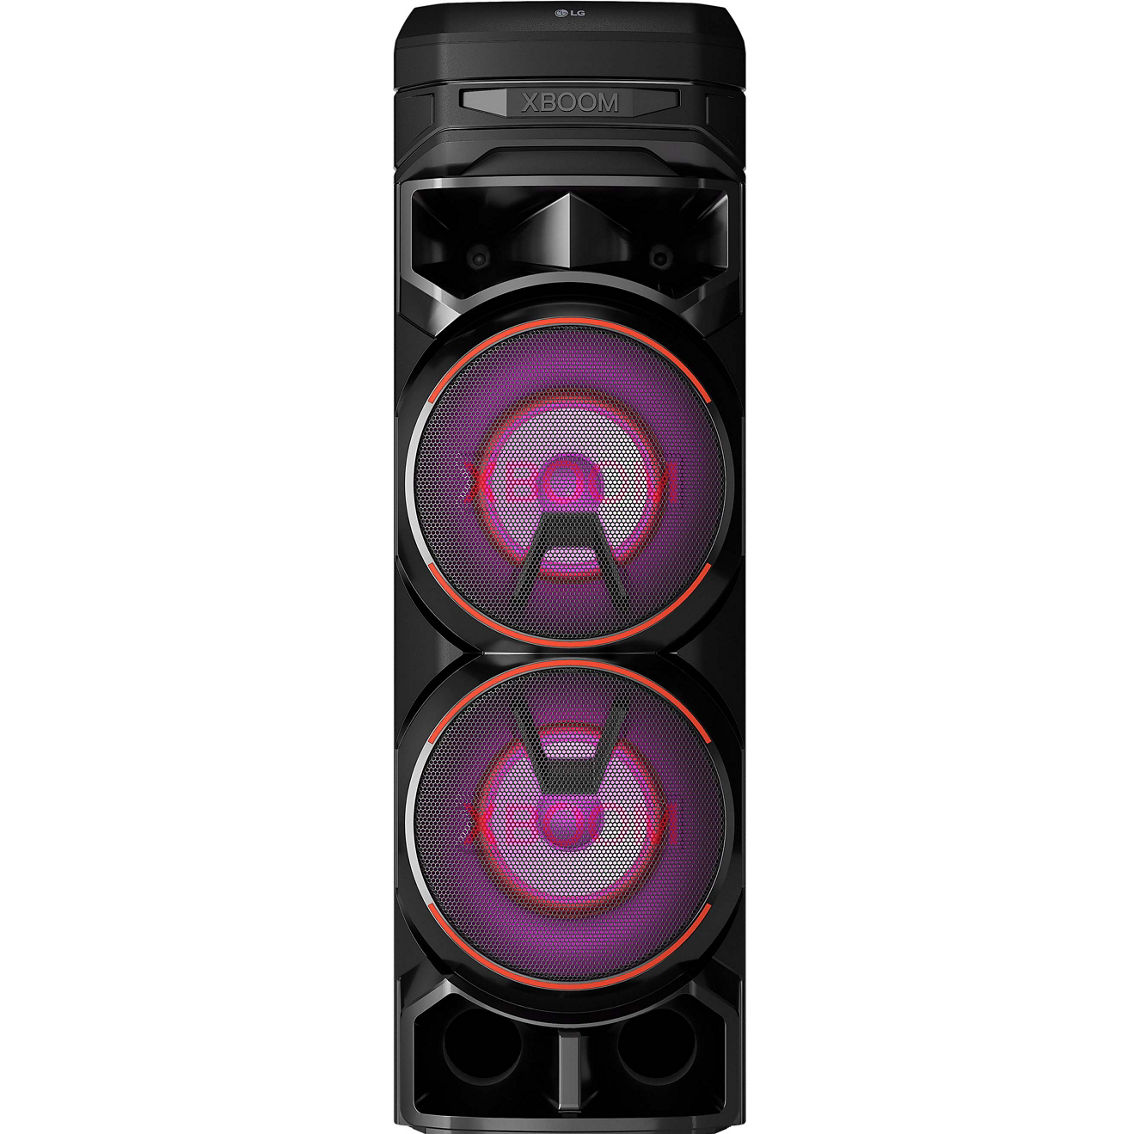 LG RNC9 XBOOM Audio System - Image 1 of 4